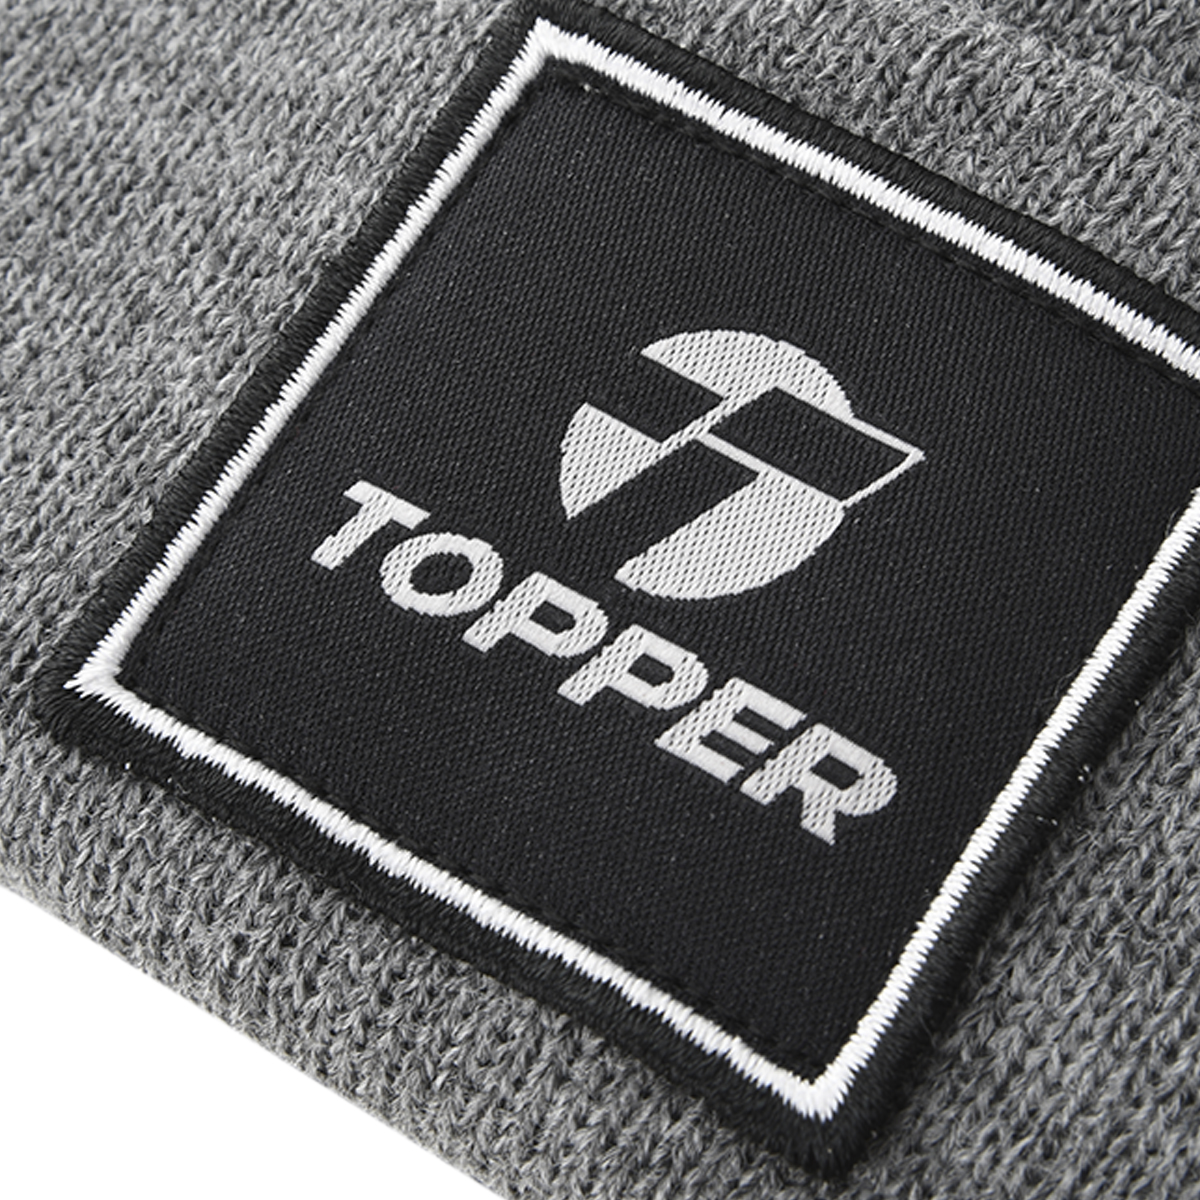 Gorro Topper Classic,  image number null